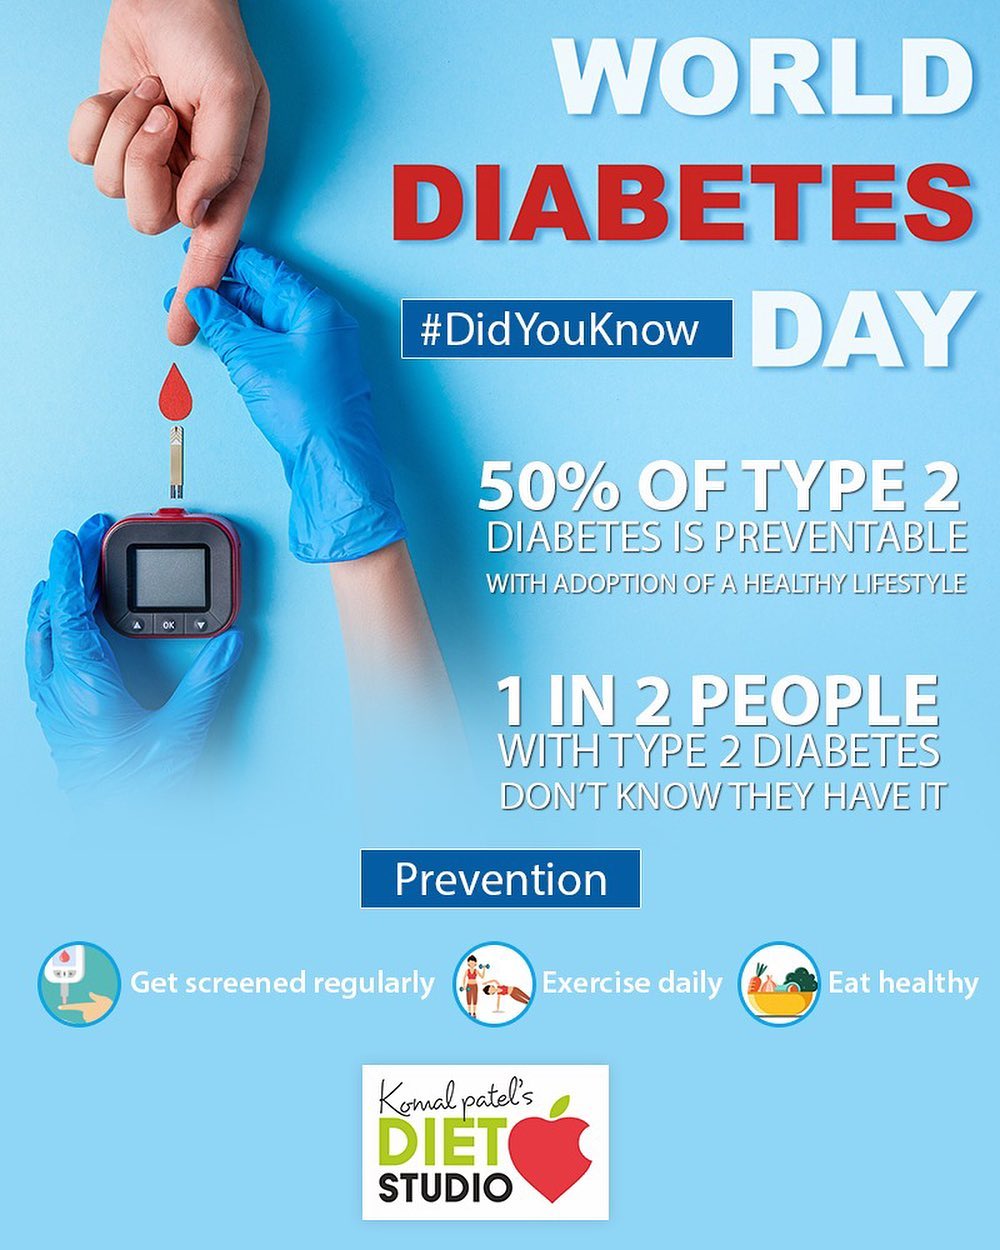 #worlddiabetesday 
World Diabetes Day falls on 14th November. The purpose of this day is to raise awareness of a condition that millions of people all around the world live with every day. 
The mission is to promote diabetes care, prevention and a cure worldwide.
#diabetes #diabetesday #worlddiabetesday #diabetescare #komalpatel